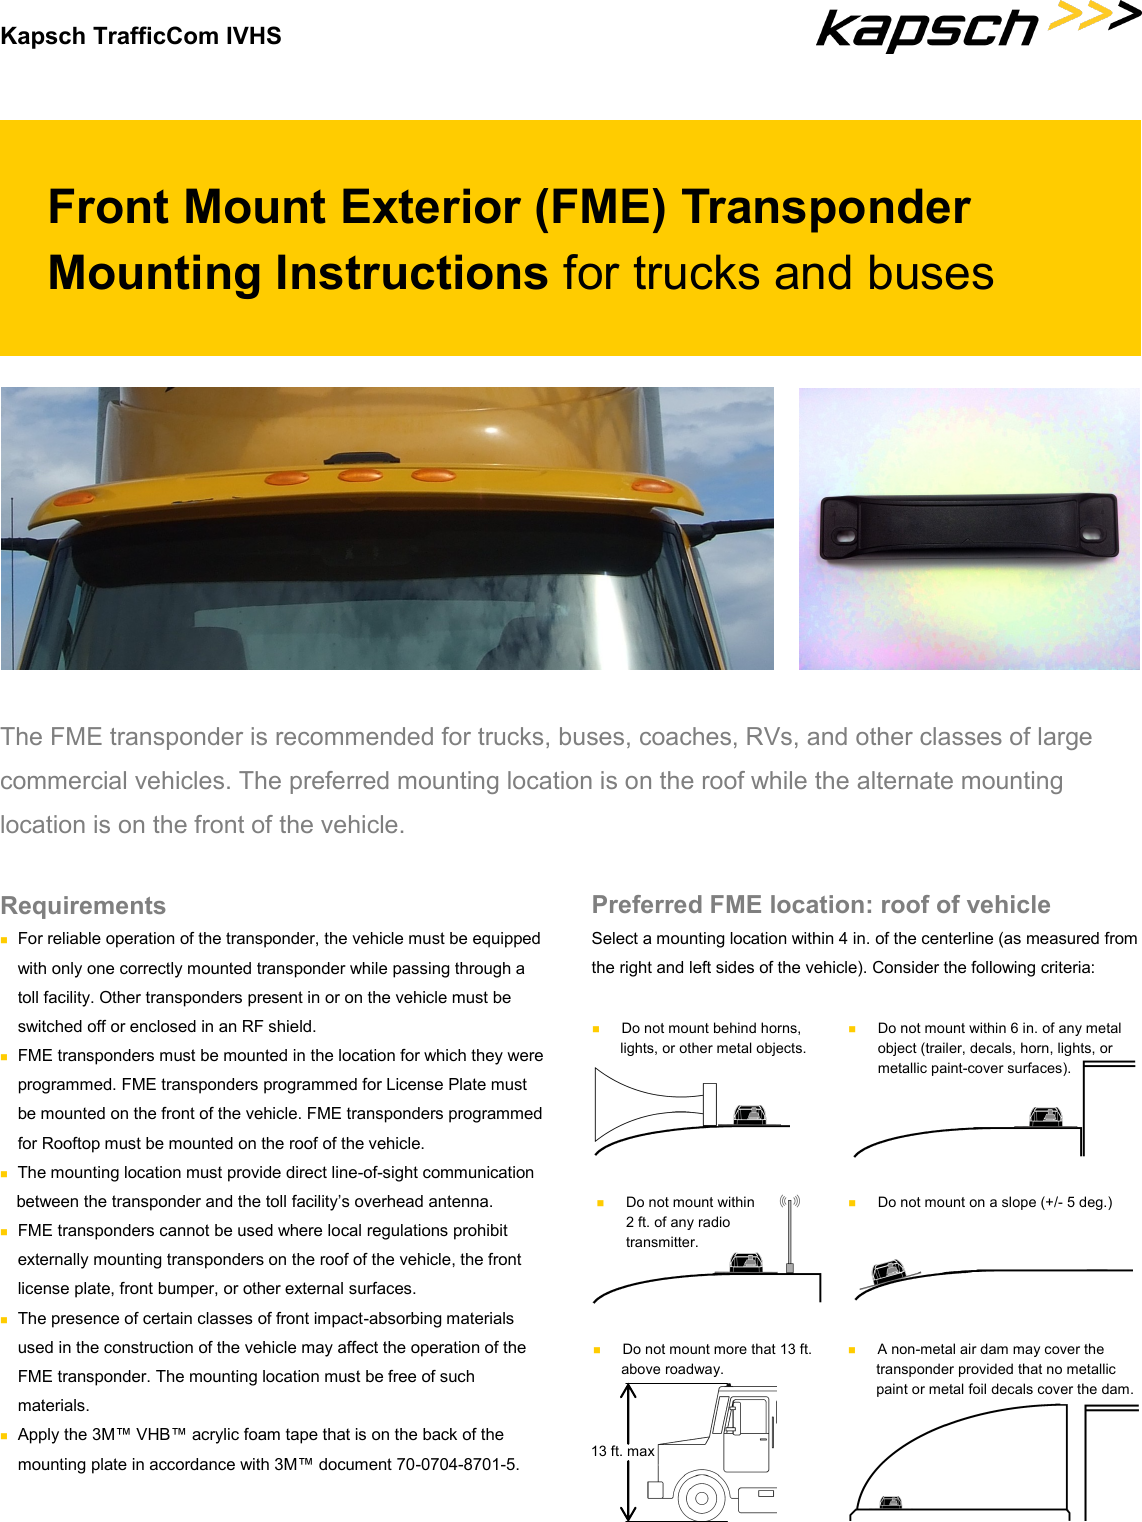 Kapsch TrafficCom IVHS Front Mount Exterior (FME) Transponder Mounting Instructions for trucks and buses The FME transponder is recommended for trucks, buses, coaches, RVs, and other classes of large commercial vehicles. The preferred mounting location is on the roof while the alternate mounting location is on the front of the vehicle.  Preferred FME location: roof of vehicle Select a mounting location within 4 in. of the centerline (as measured from the right and left sides of the vehicle). Consider the following criteria: Requirements  For reliable operation of the transponder, the vehicle must be equipped with only one correctly mounted transponder while passing through a toll facility. Other transponders present in or on the vehicle must be switched off or enclosed in an RF shield.  FME transponders must be mounted in the location for which they were  programmed. FME transponders programmed for License Plate must be mounted on the front of the vehicle. FME transponders programmed for Rooftop must be mounted on the roof of the vehicle.  The mounting location must provide direct line-of-sight communication between the transponder and the toll facility’s overhead antenna.  FME transponders cannot be used where local regulations prohibit externally mounting transponders on the roof of the vehicle, the front  license plate, front bumper, or other external surfaces.  The presence of certain classes of front impact-absorbing materials used in the construction of the vehicle may affect the operation of the FME transponder. The mounting location must be free of such  materials.  Apply the 3M™ VHB™ acrylic foam tape that is on the back of the mounting plate in accordance with 3M™ document 70-0704-8701-5.   Do not mount behind horns, lights, or other metal objects.   Do not mount within 6 in. of any metal object (trailer, decals, horn, lights, or metallic paint-cover surfaces).   Do not mount within 2 ft. of any radio transmitter.   Do not mount on a slope (+/- 5 deg.)   Do not mount more that 13 ft. above roadway. 13 ft. max   A non-metal air dam may cover the transponder provided that no metallic paint or metal foil decals cover the dam. 